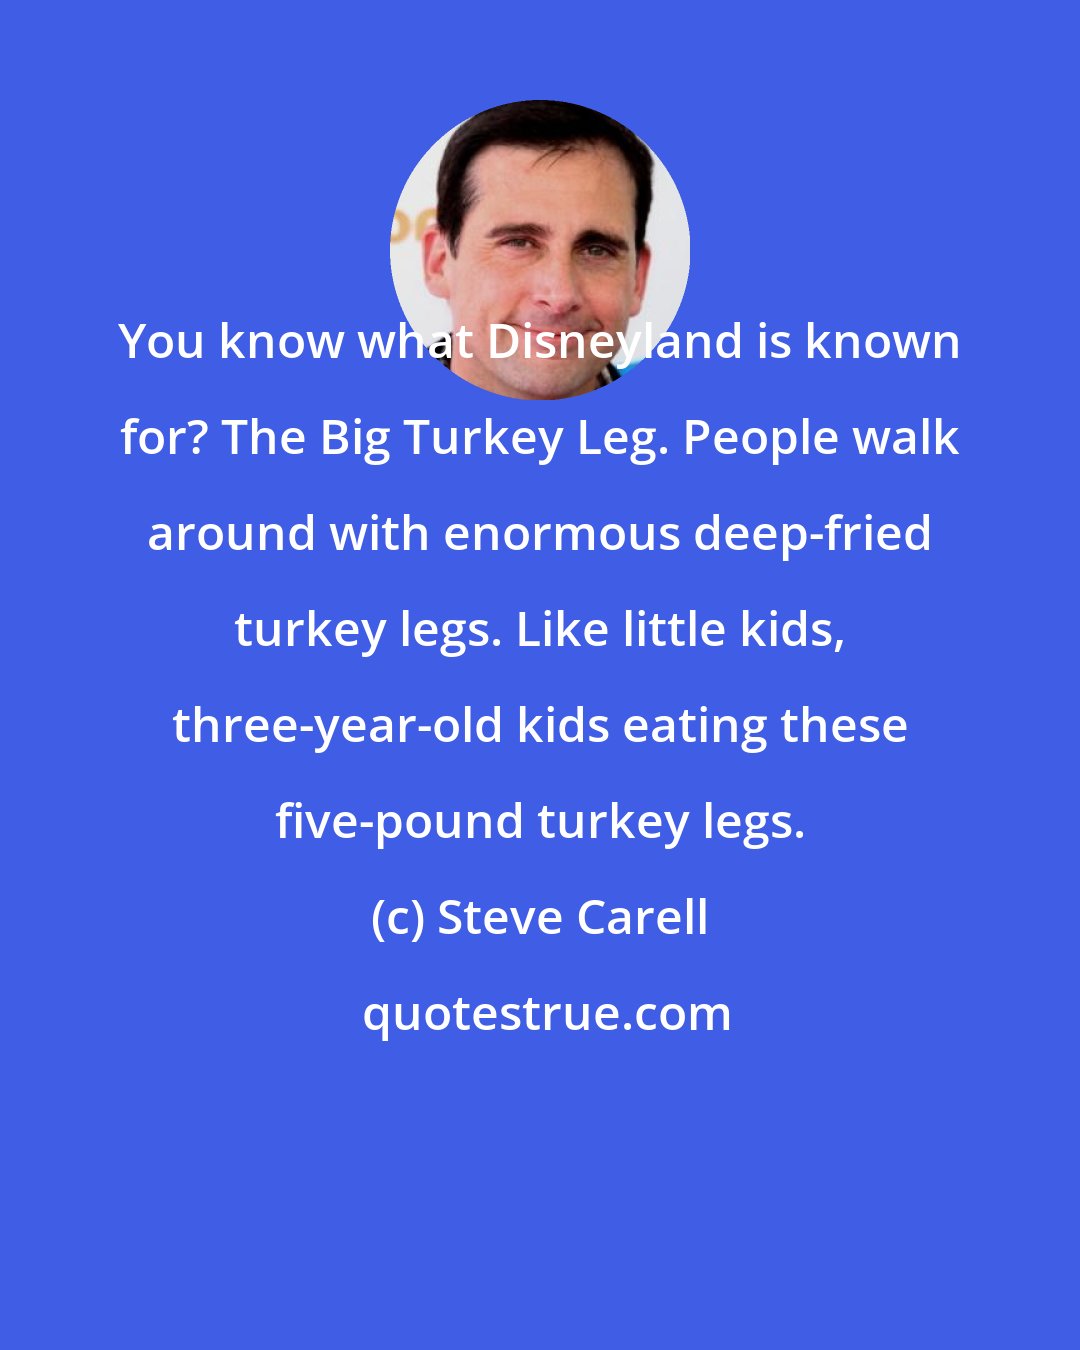 Steve Carell: You know what Disneyland is known for? The Big Turkey Leg. People walk around with enormous deep-fried turkey legs. Like little kids, three-year-old kids eating these five-pound turkey legs.